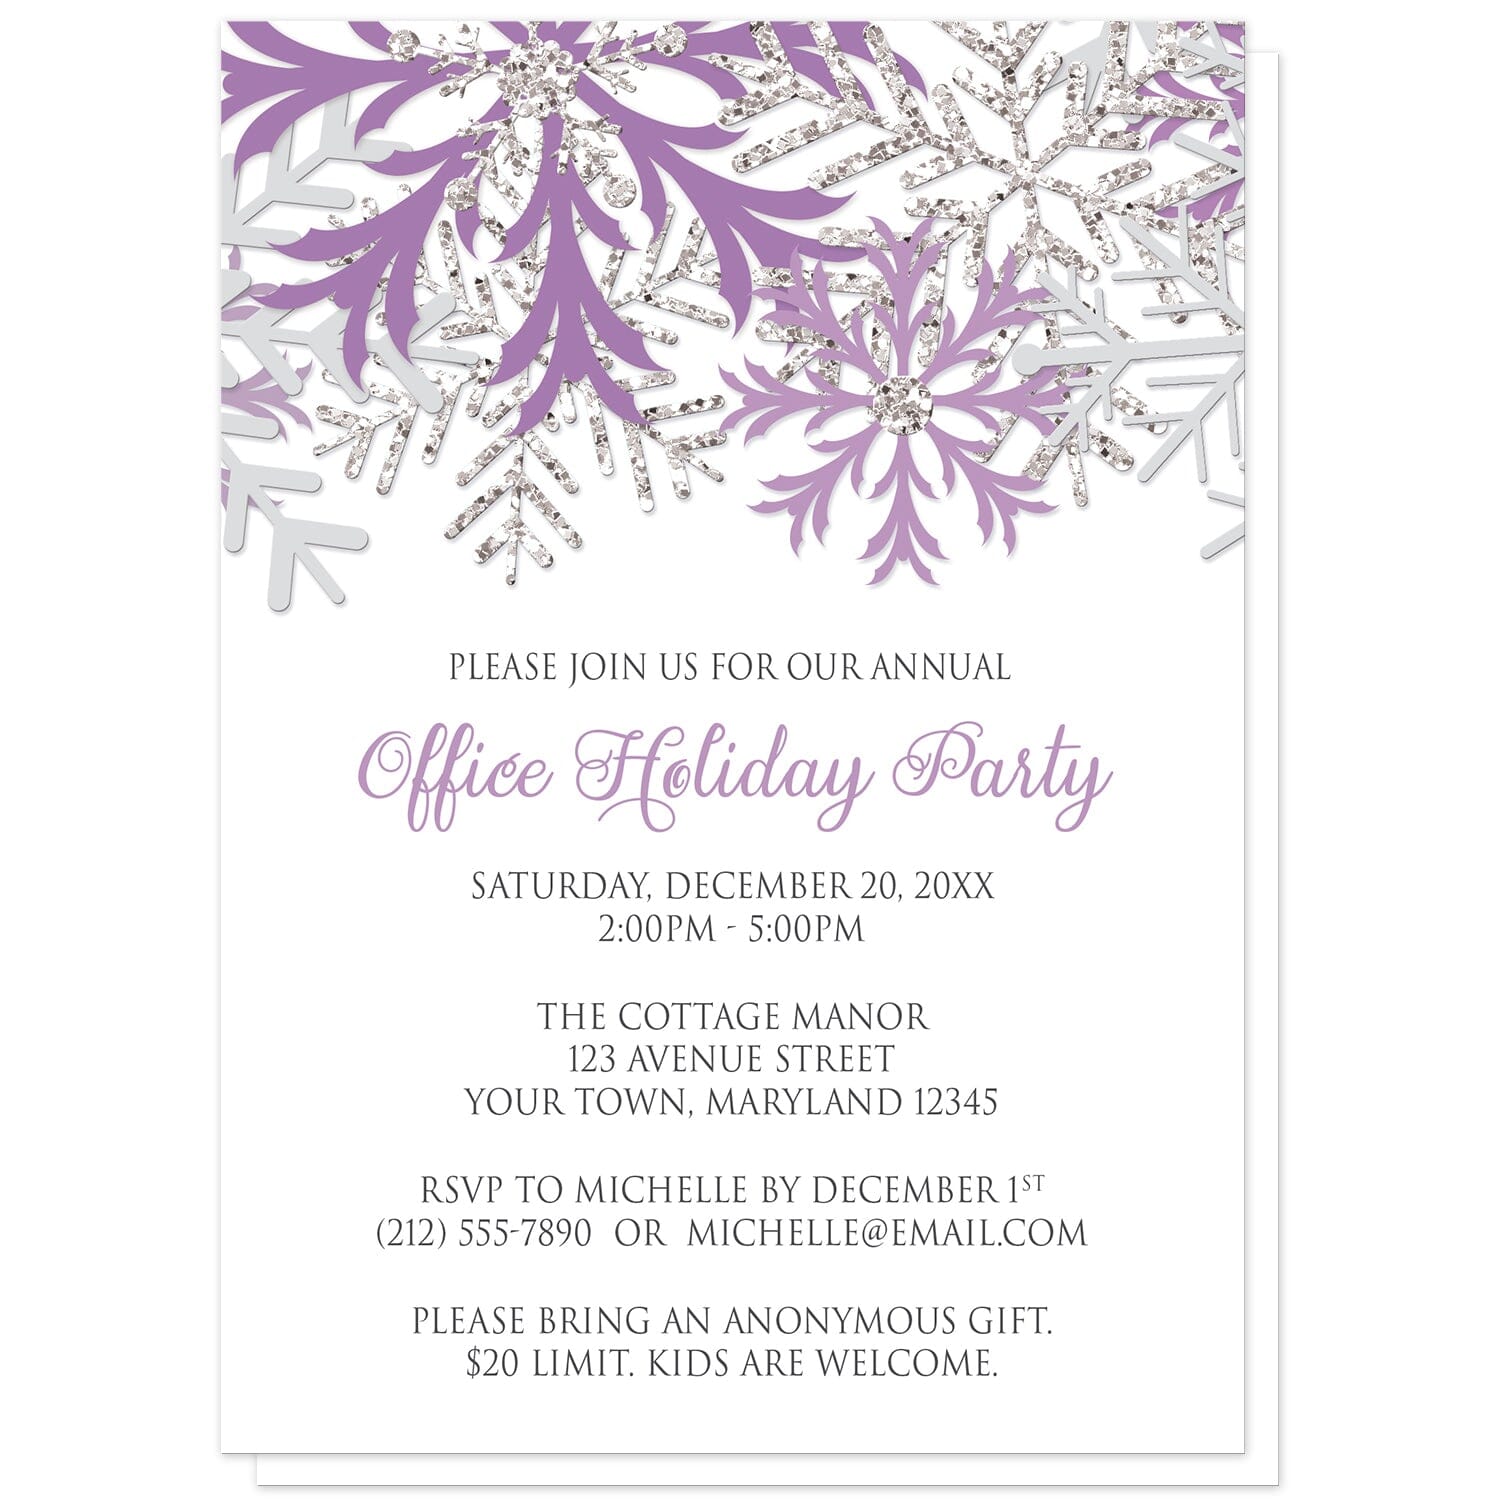 Winter Purple Silver Snowflake Holiday Party Invitations at Artistically Invited. Winter purple silver snowflake holiday party invitations with purple, light purple, and silver-colored glitter-illustrated snowflakes over a white background. Your personalized party details for your home or office party are custom printed in gray and purple. The occasion title is printed in a whimsical purple script font while your remaining details are printed in an all-capital letters gray serif font.